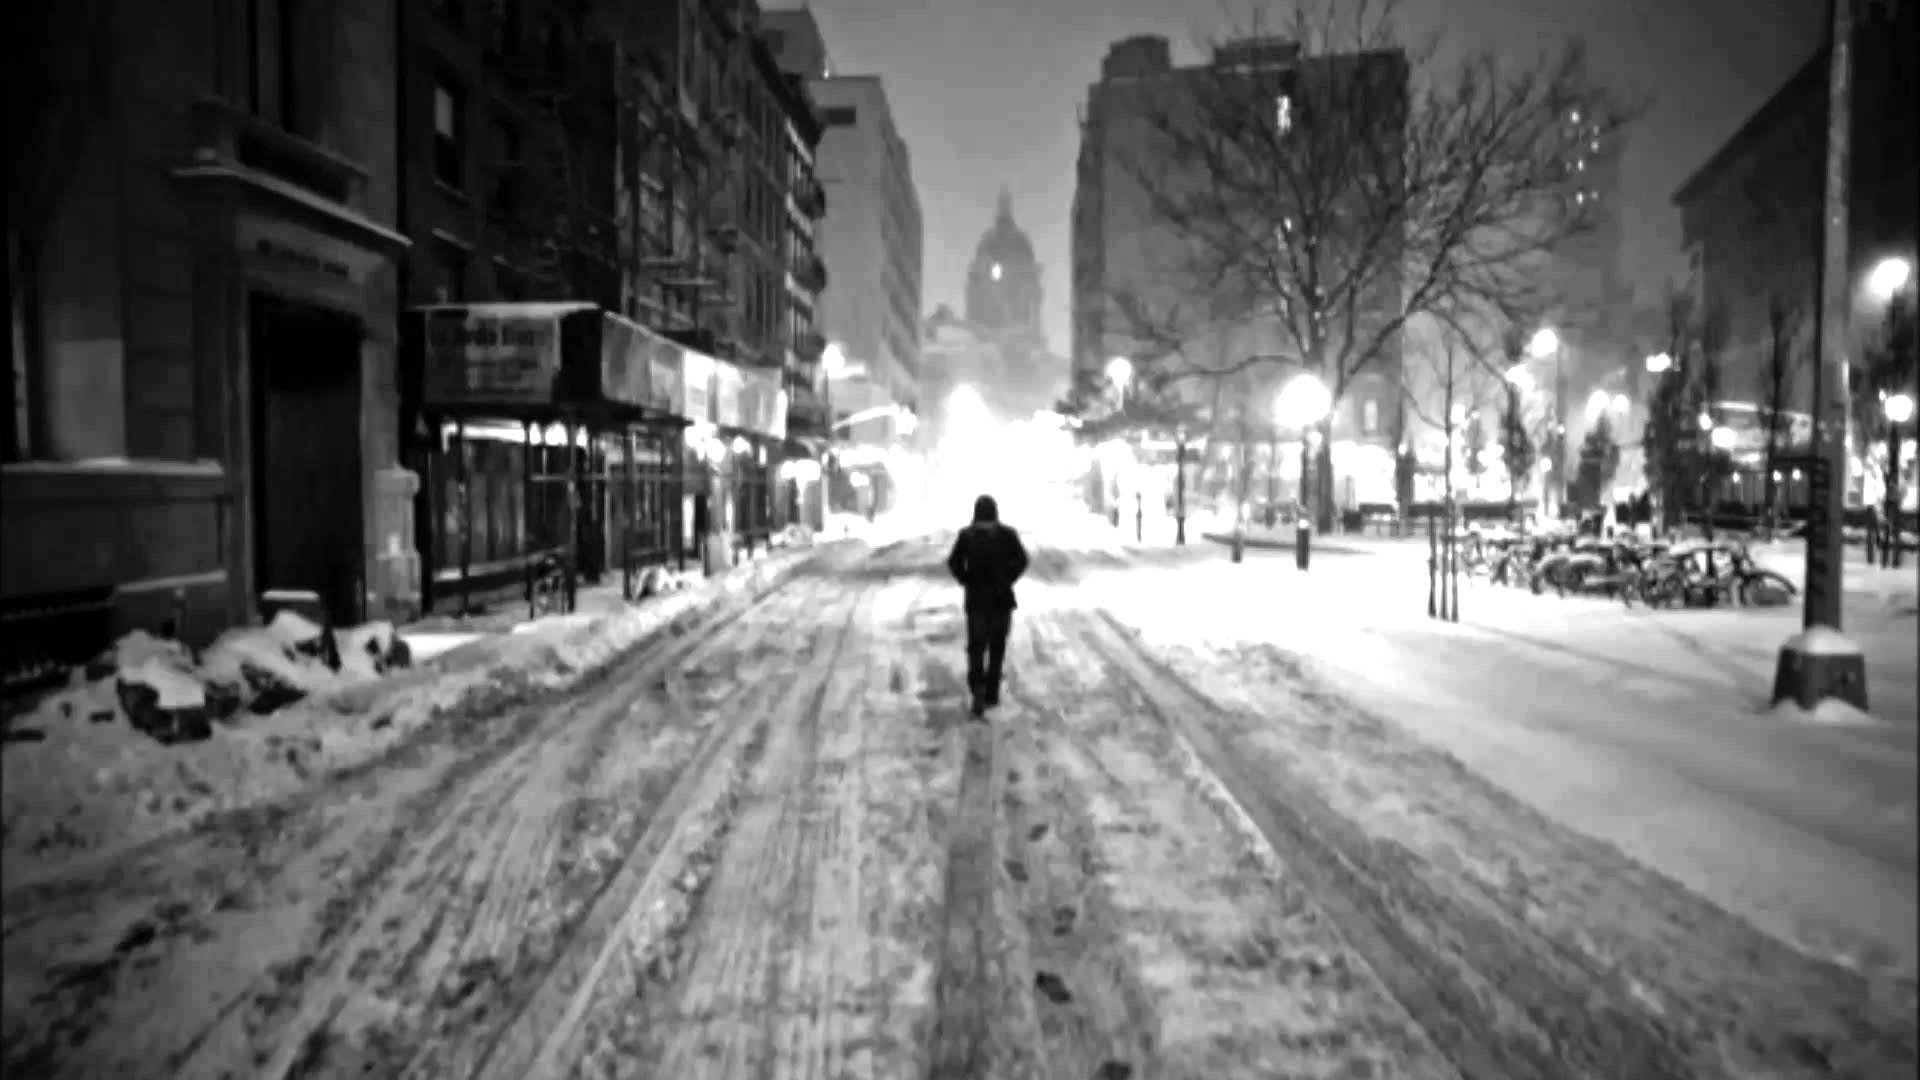 lonely, Mood, Sad, Alone, Sadness, Emotion, People, Loneliness, Solitude, Road, Winter, Downtown, City, Cities Wallpaper